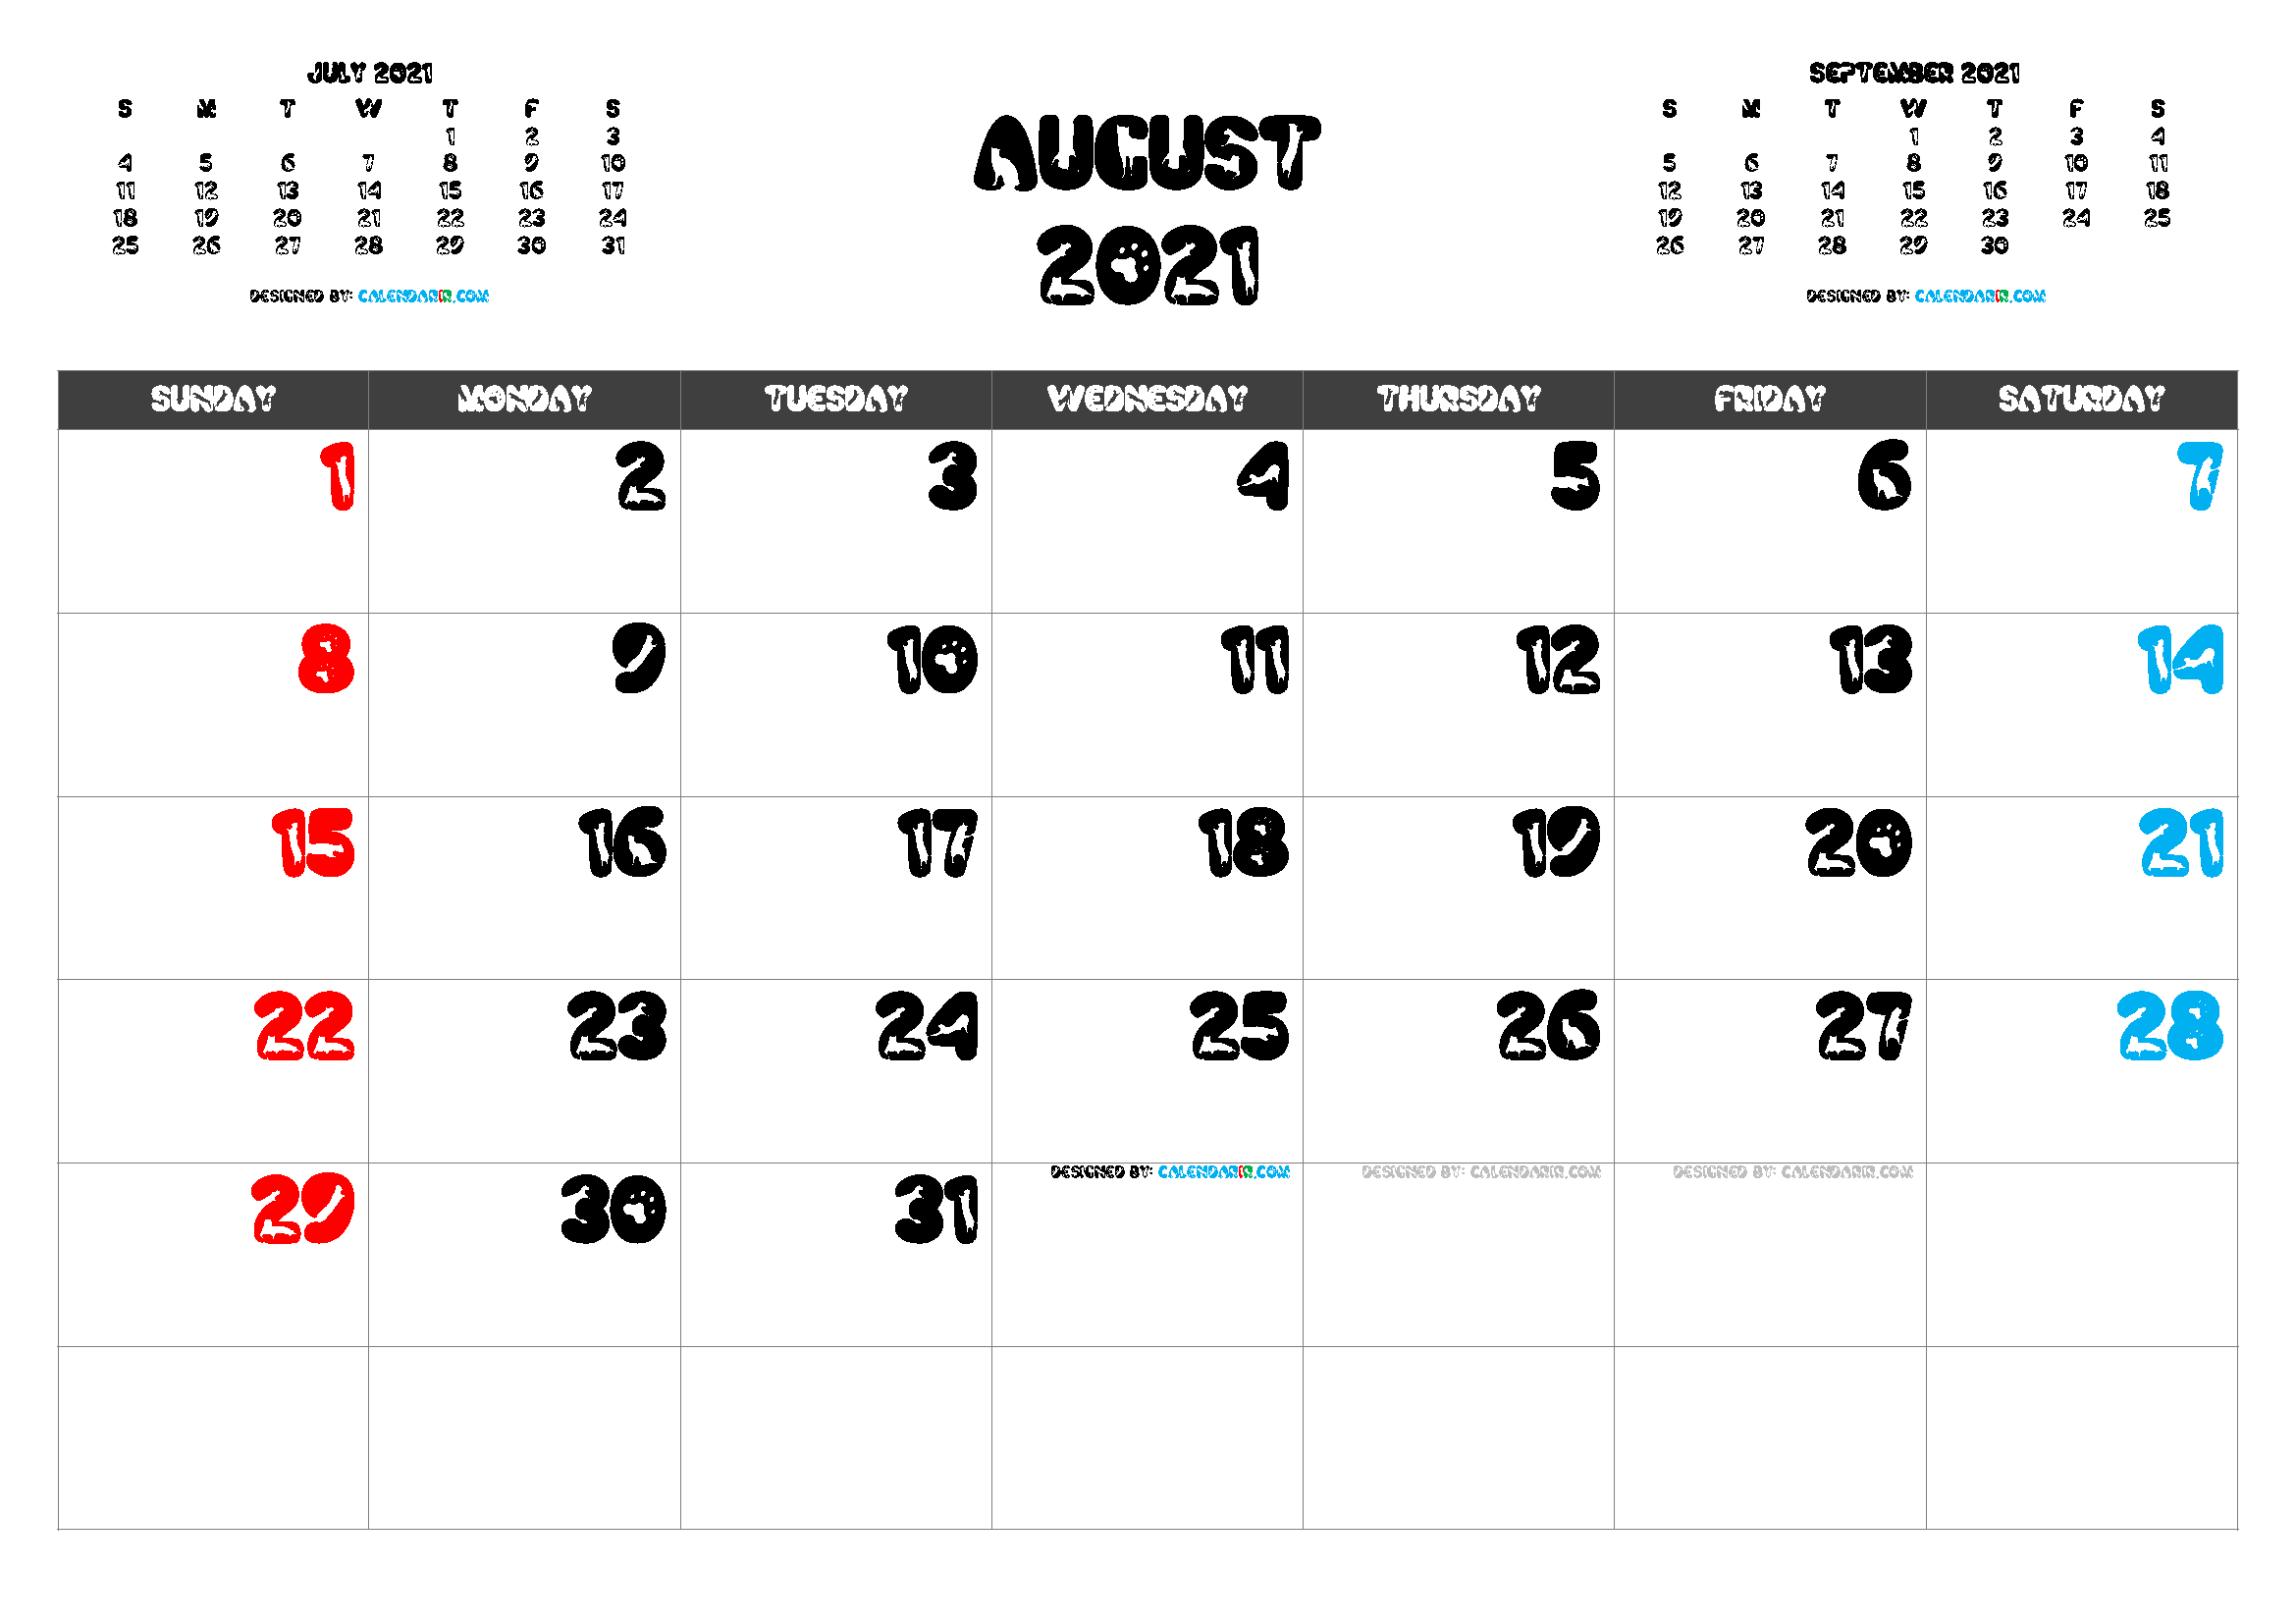 Free Printable August 2021 Calendar With Holidays